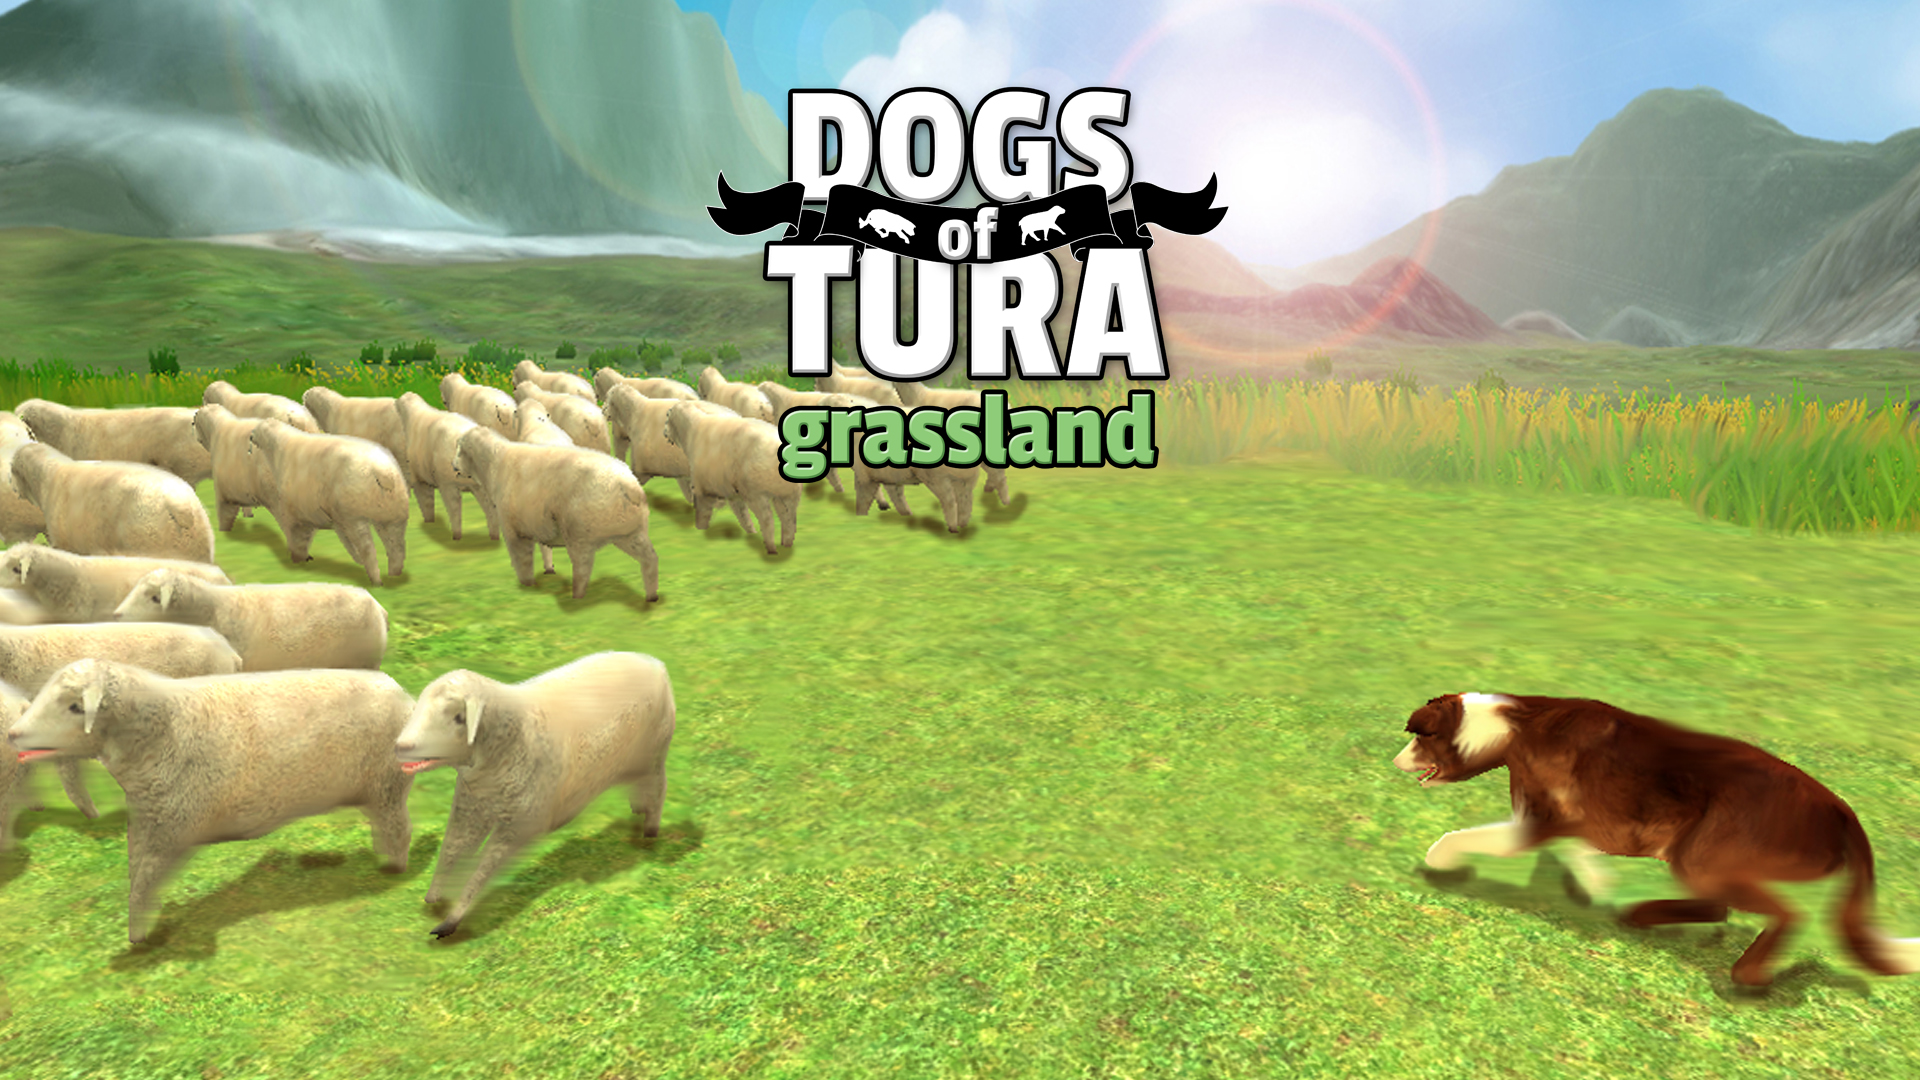 DOGS of TURA